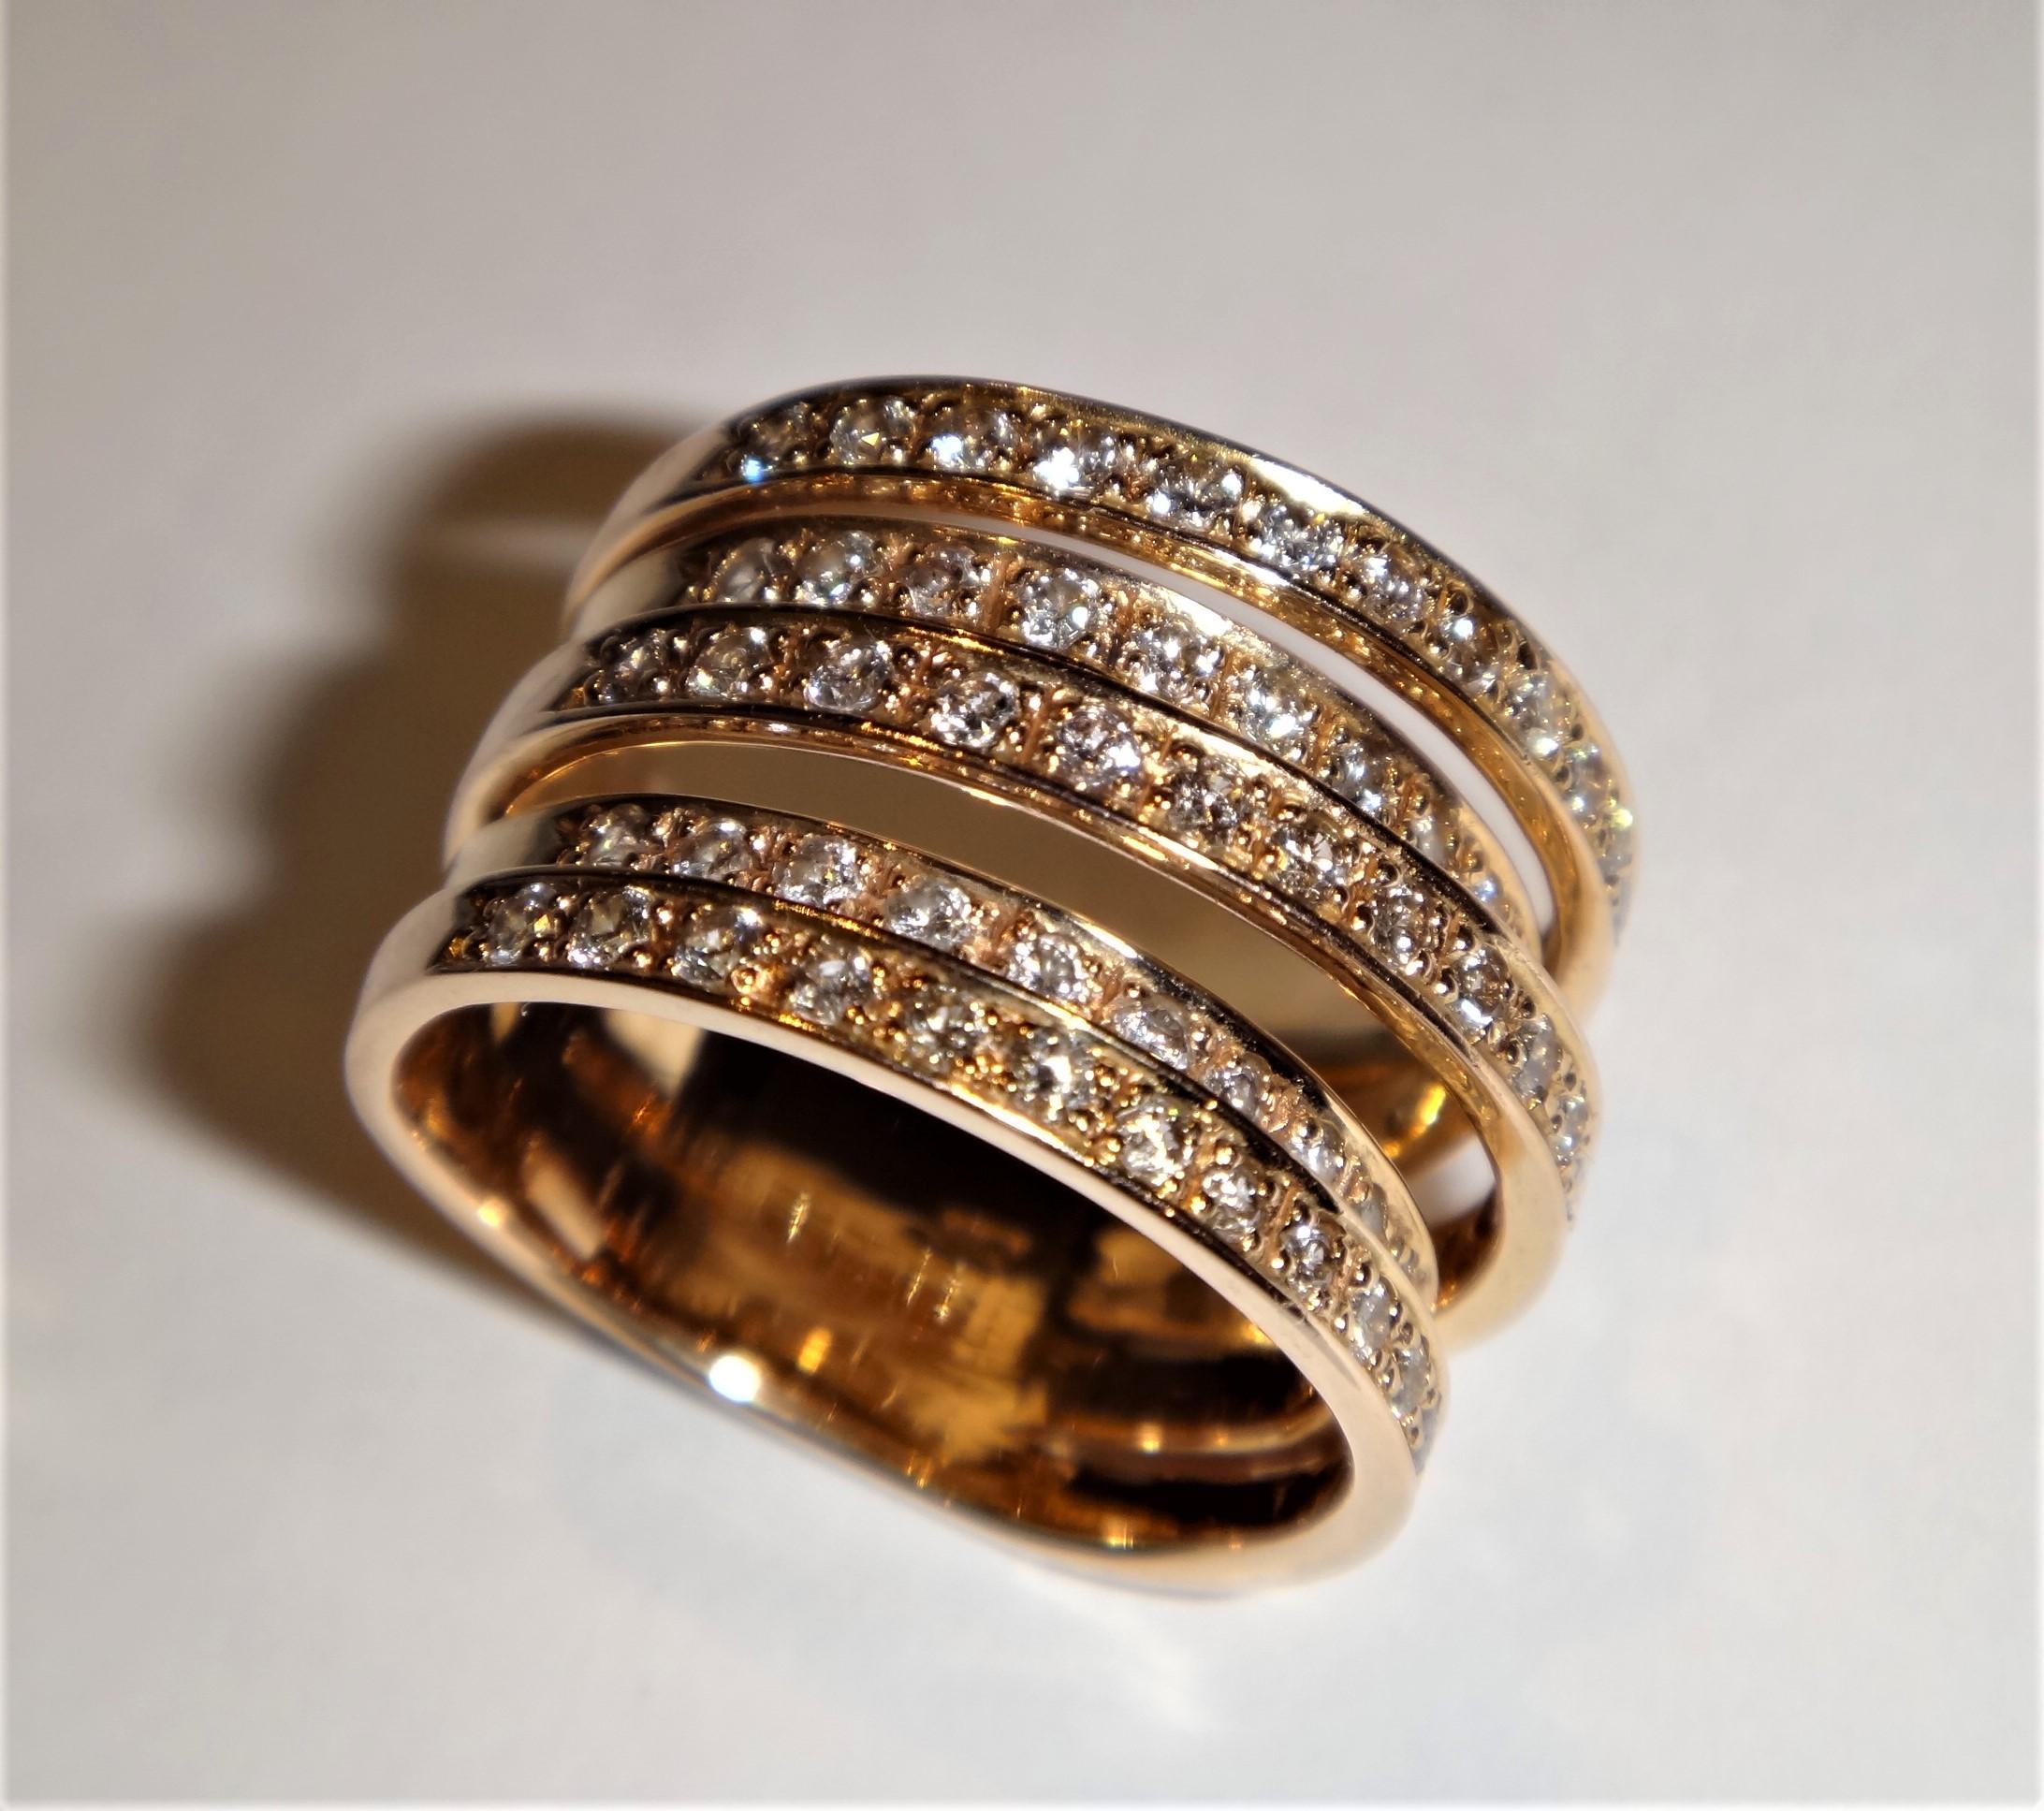 A 18Kt rose gold ring, entirely set with 75 brilliant cut diamonds. 
Diamond weight : 1.04 carats
Quality : E/F - VVS